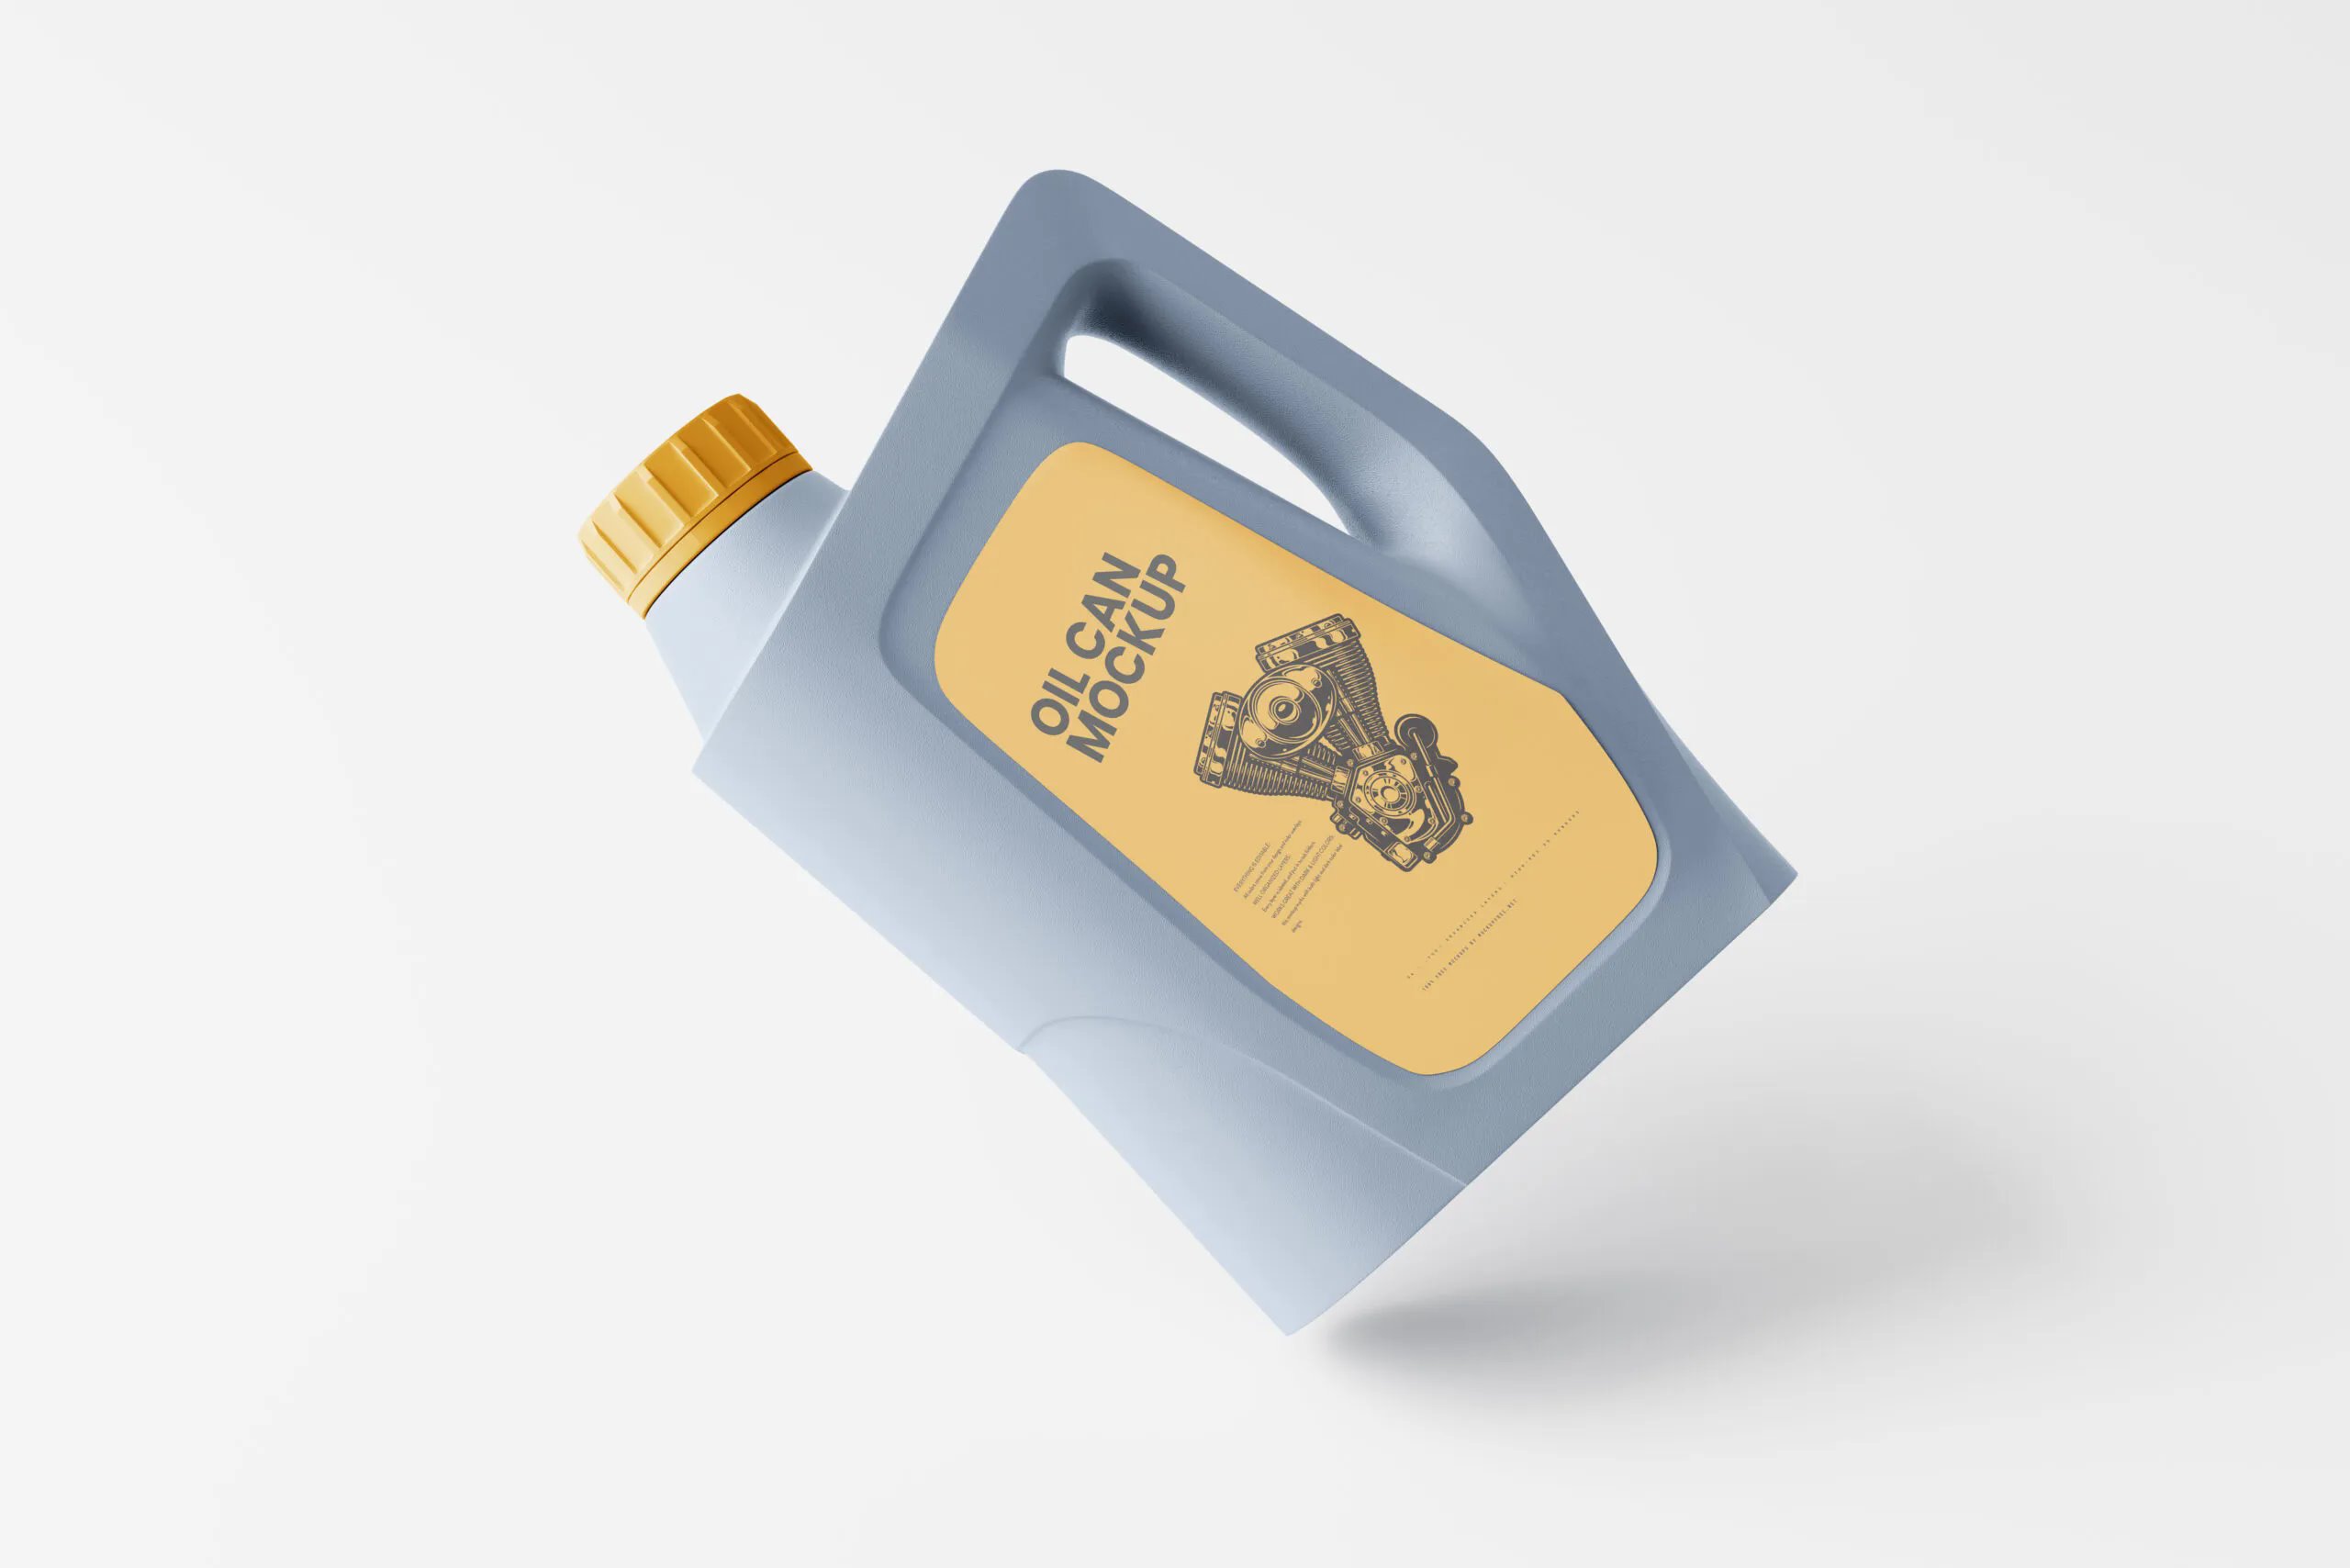 10 Plastic Engine Oil Can Mockup in Varied Sights FREE PSD